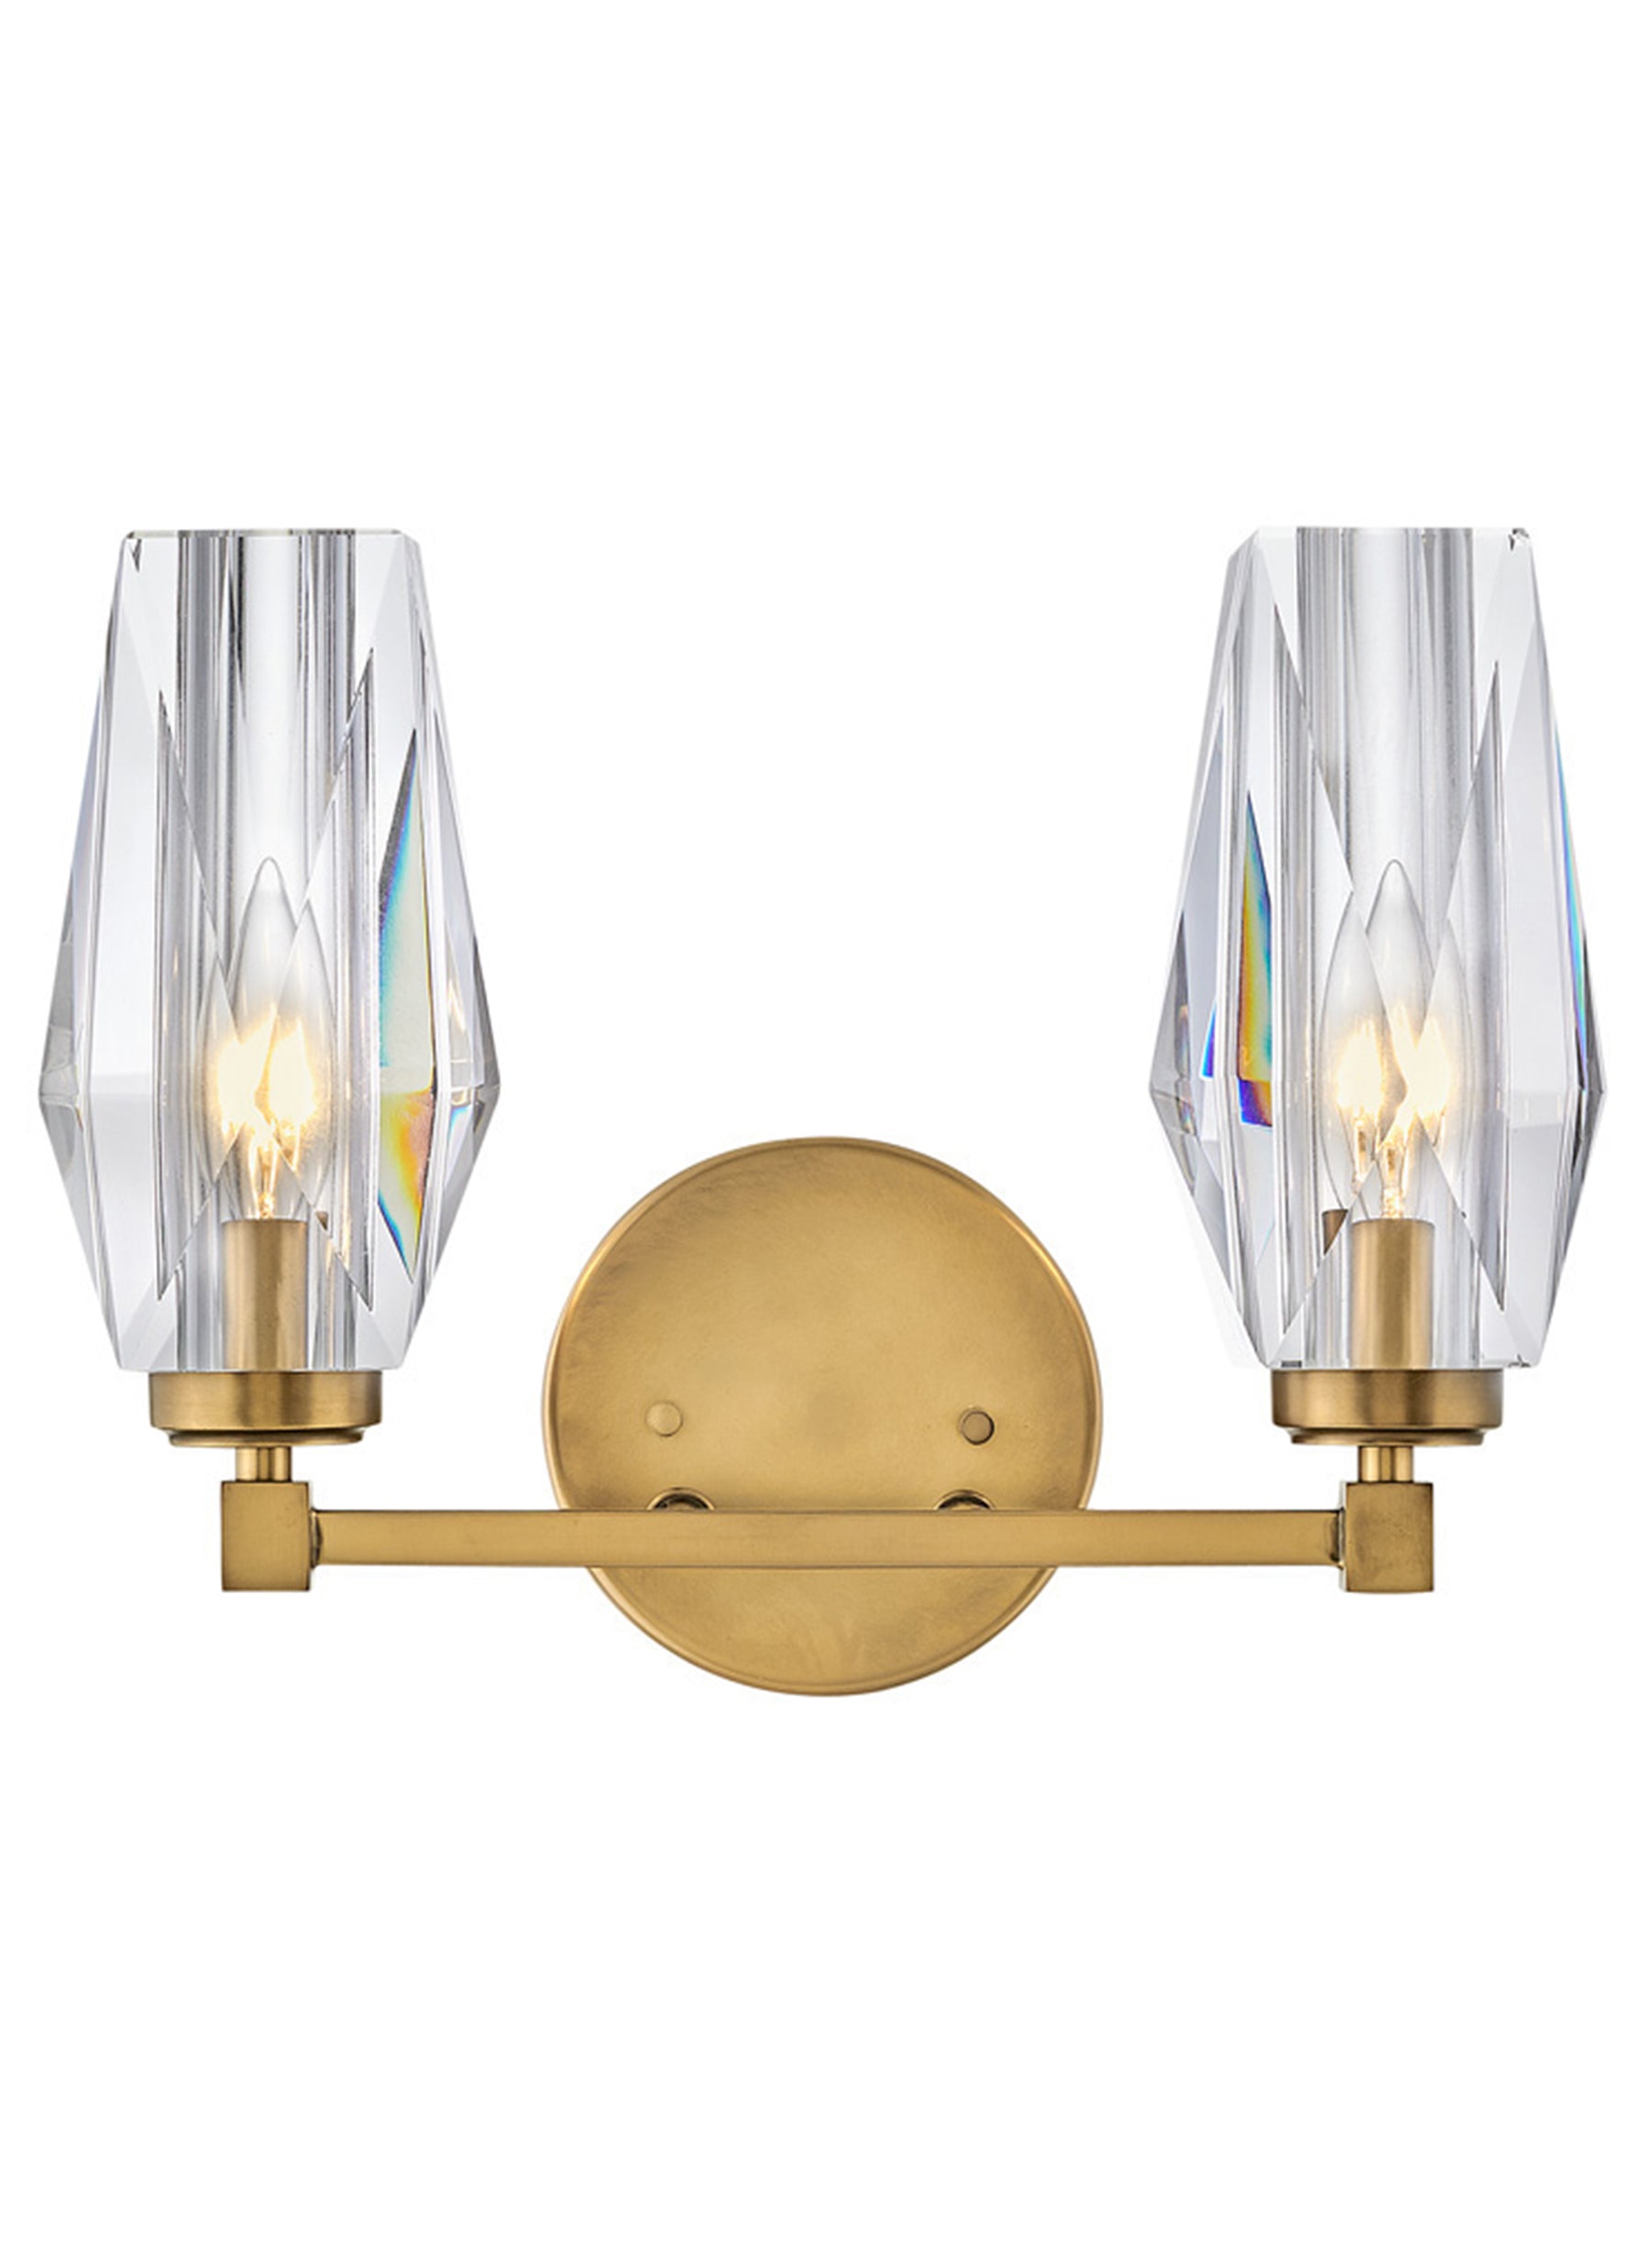 GENERATION LIGHTING Baxley Sconce Burnished Brass AW1051BBS